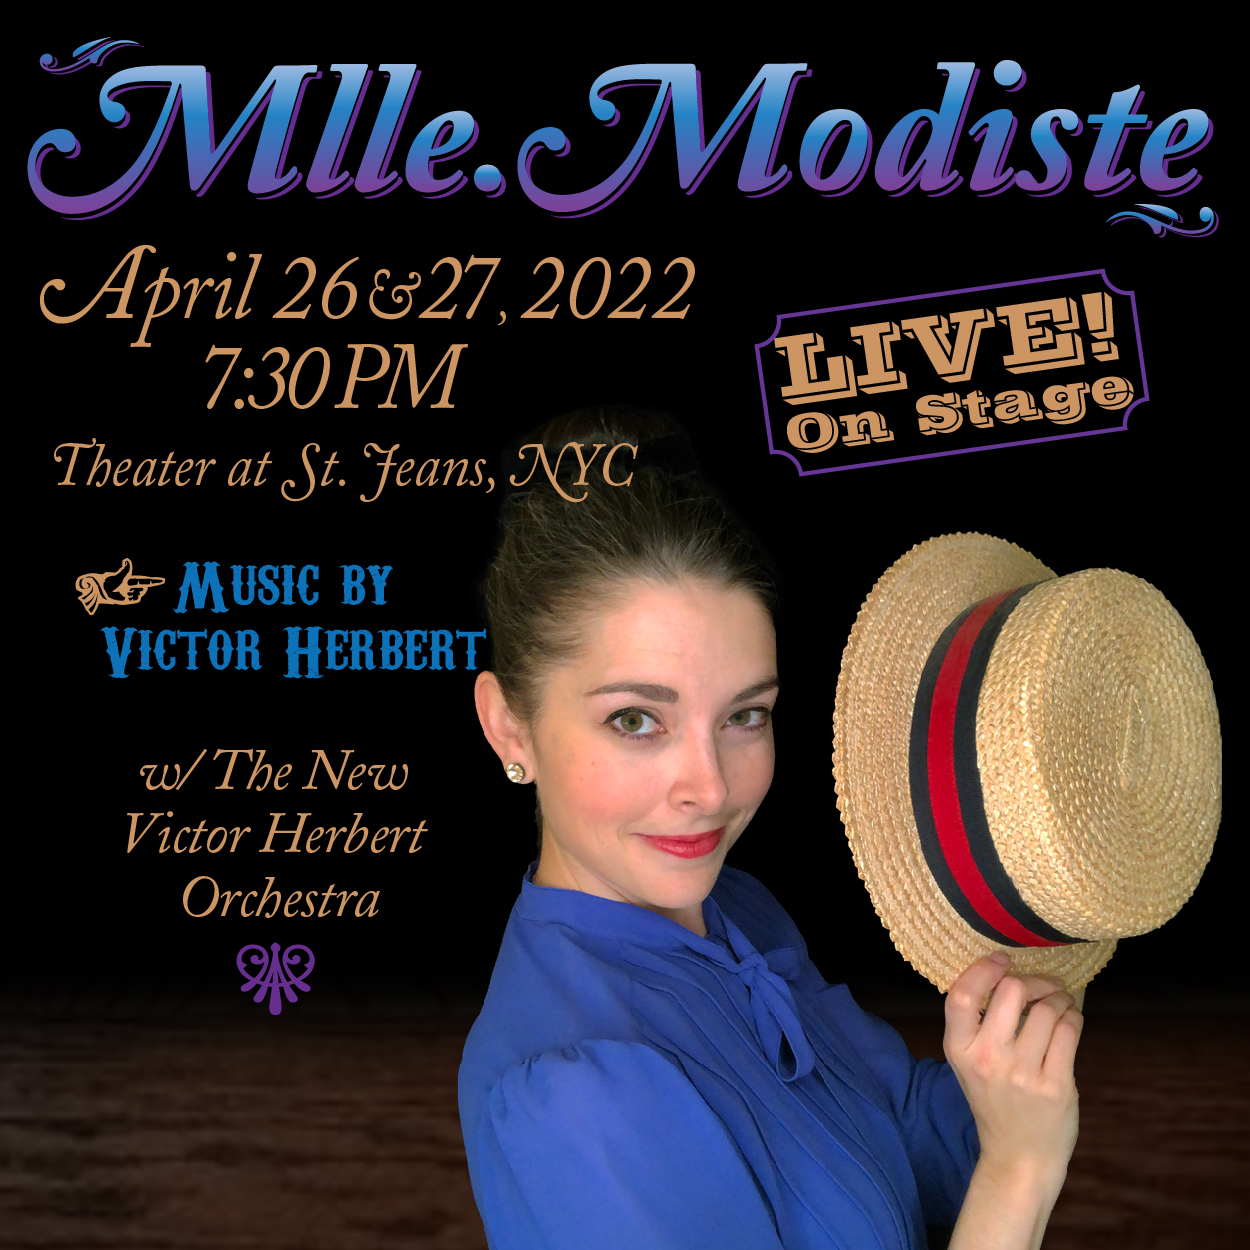 Mlle. Modiste (1905 operetta) opens April 26th-27th at Theater at St. Jeans, NYC. Music by Victor Herbert